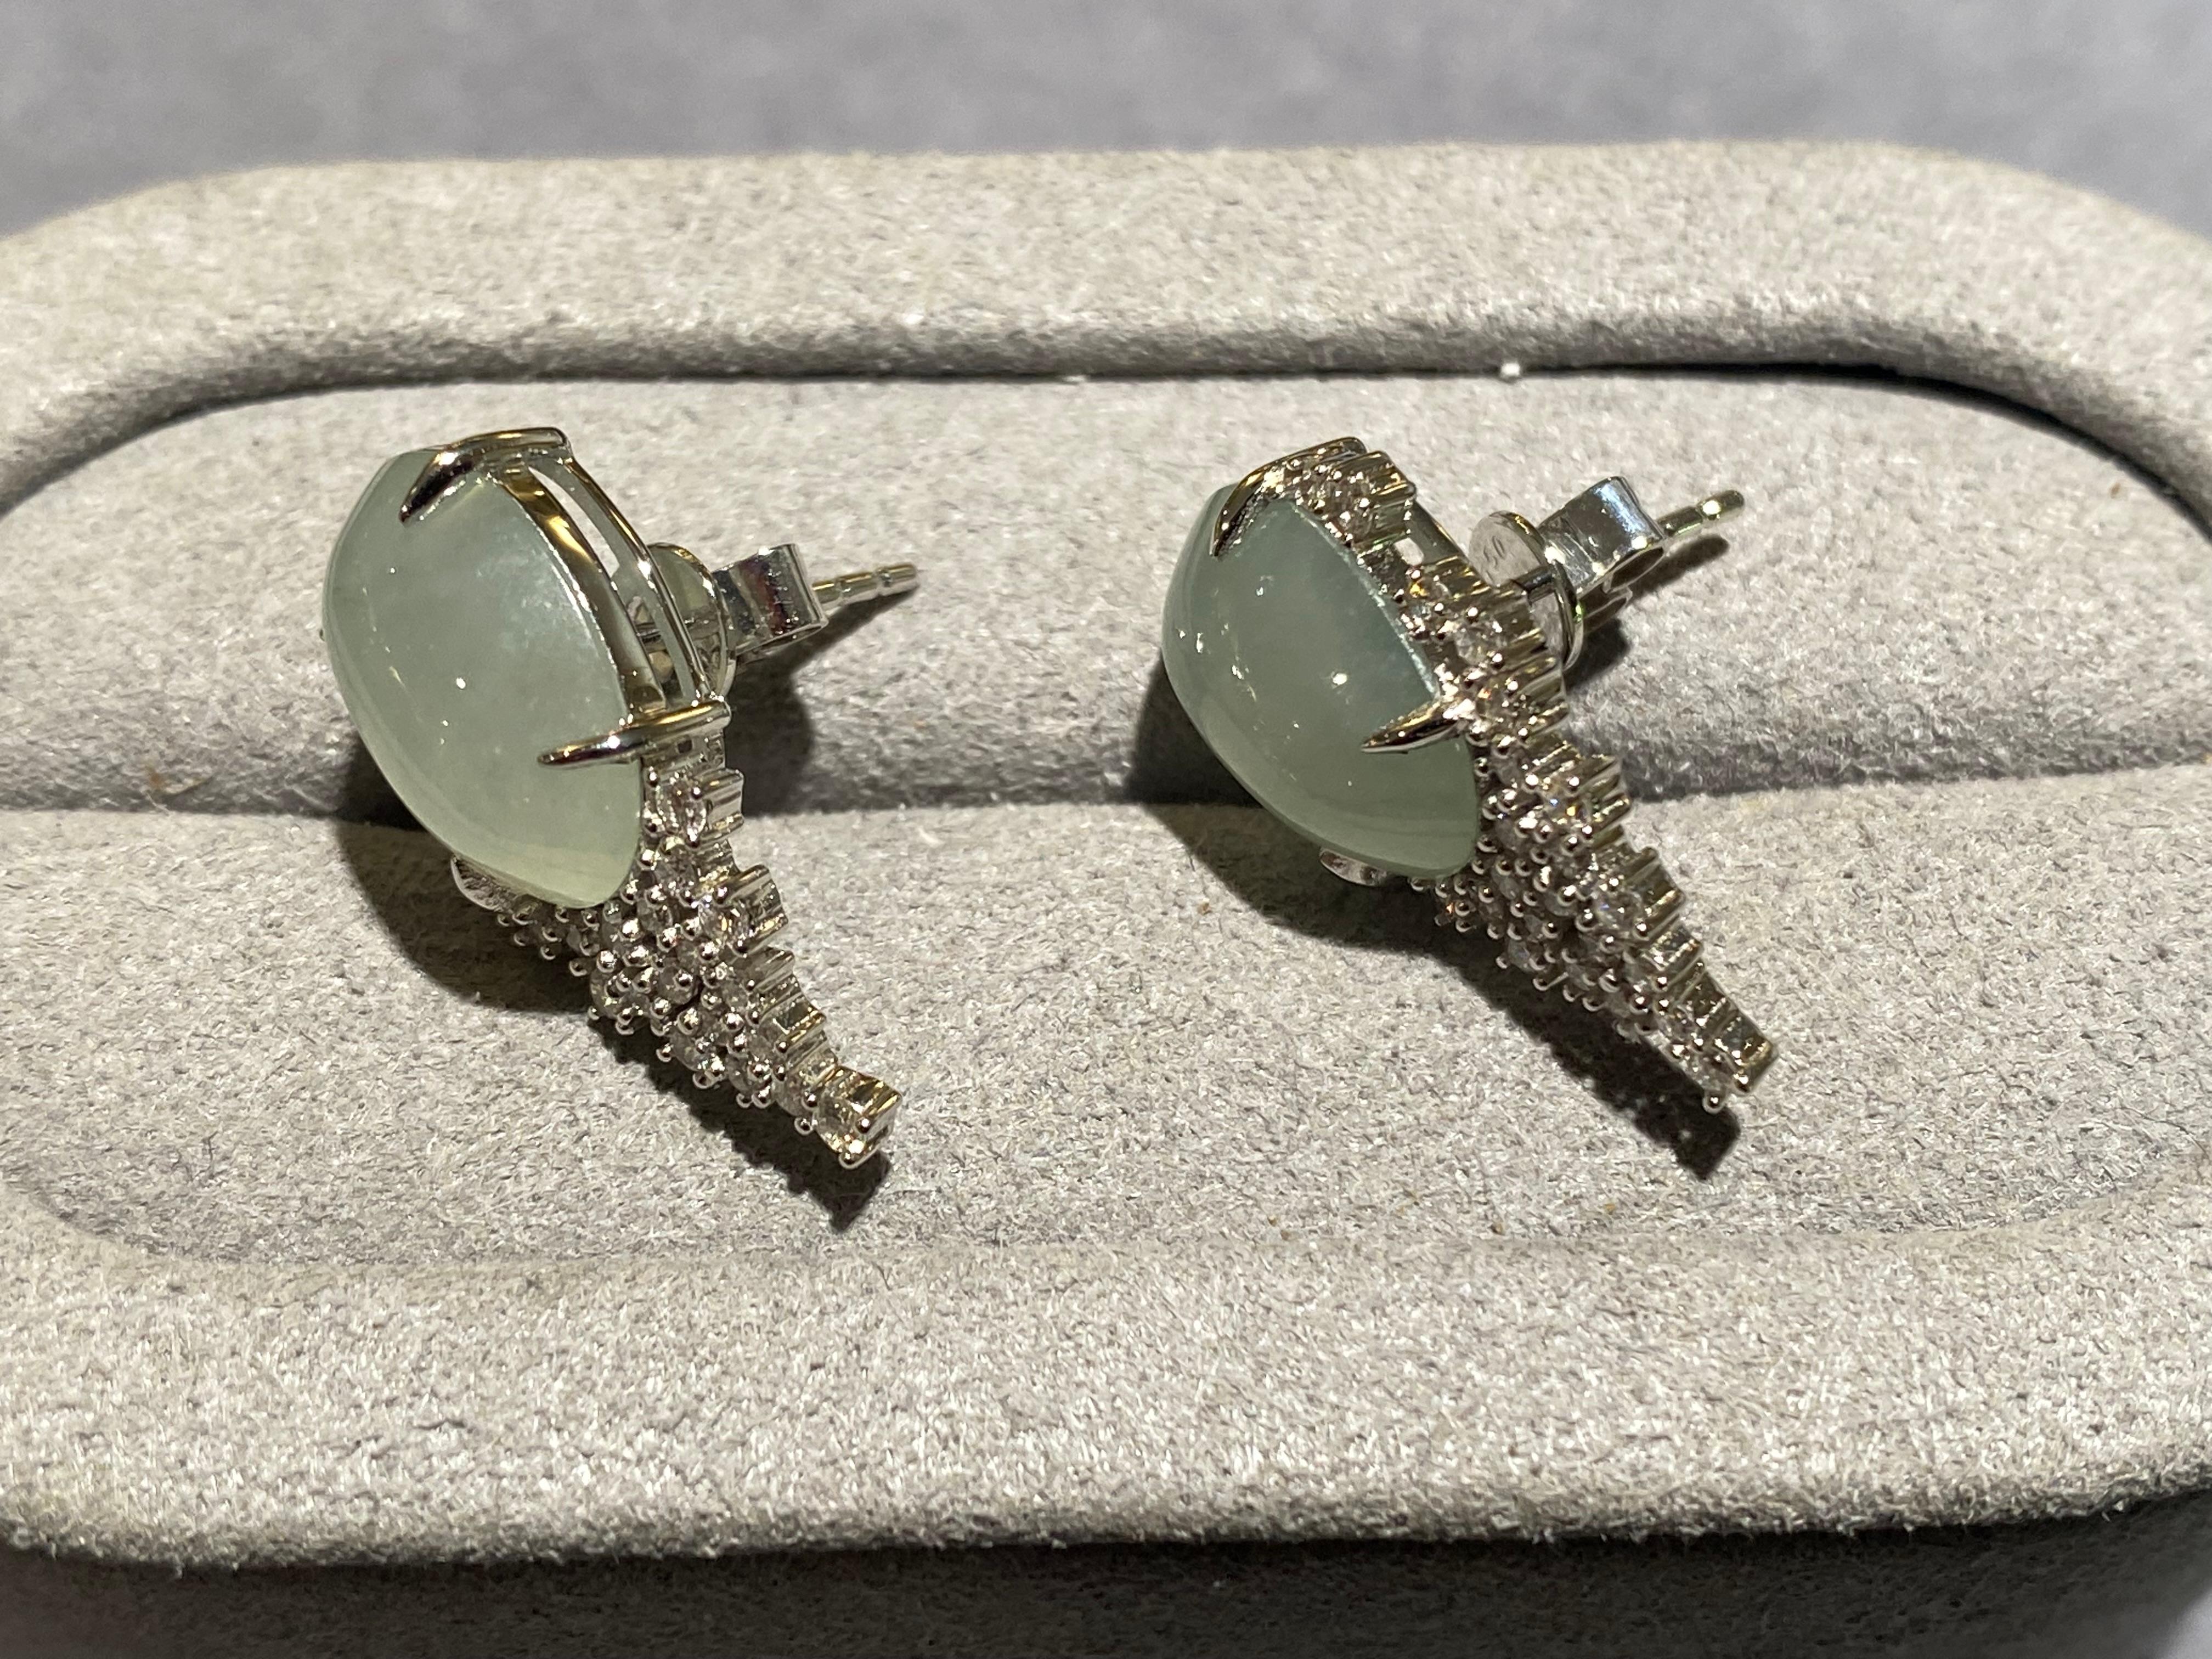 A pair of type A green jadeite and diamond earrings in 18k white gold. The oval cabochon jadeite is secured by 4 claws and at the bottom of the jadeite there is a drape of micro diamond pave. It started off with many and slowly decrease in number as